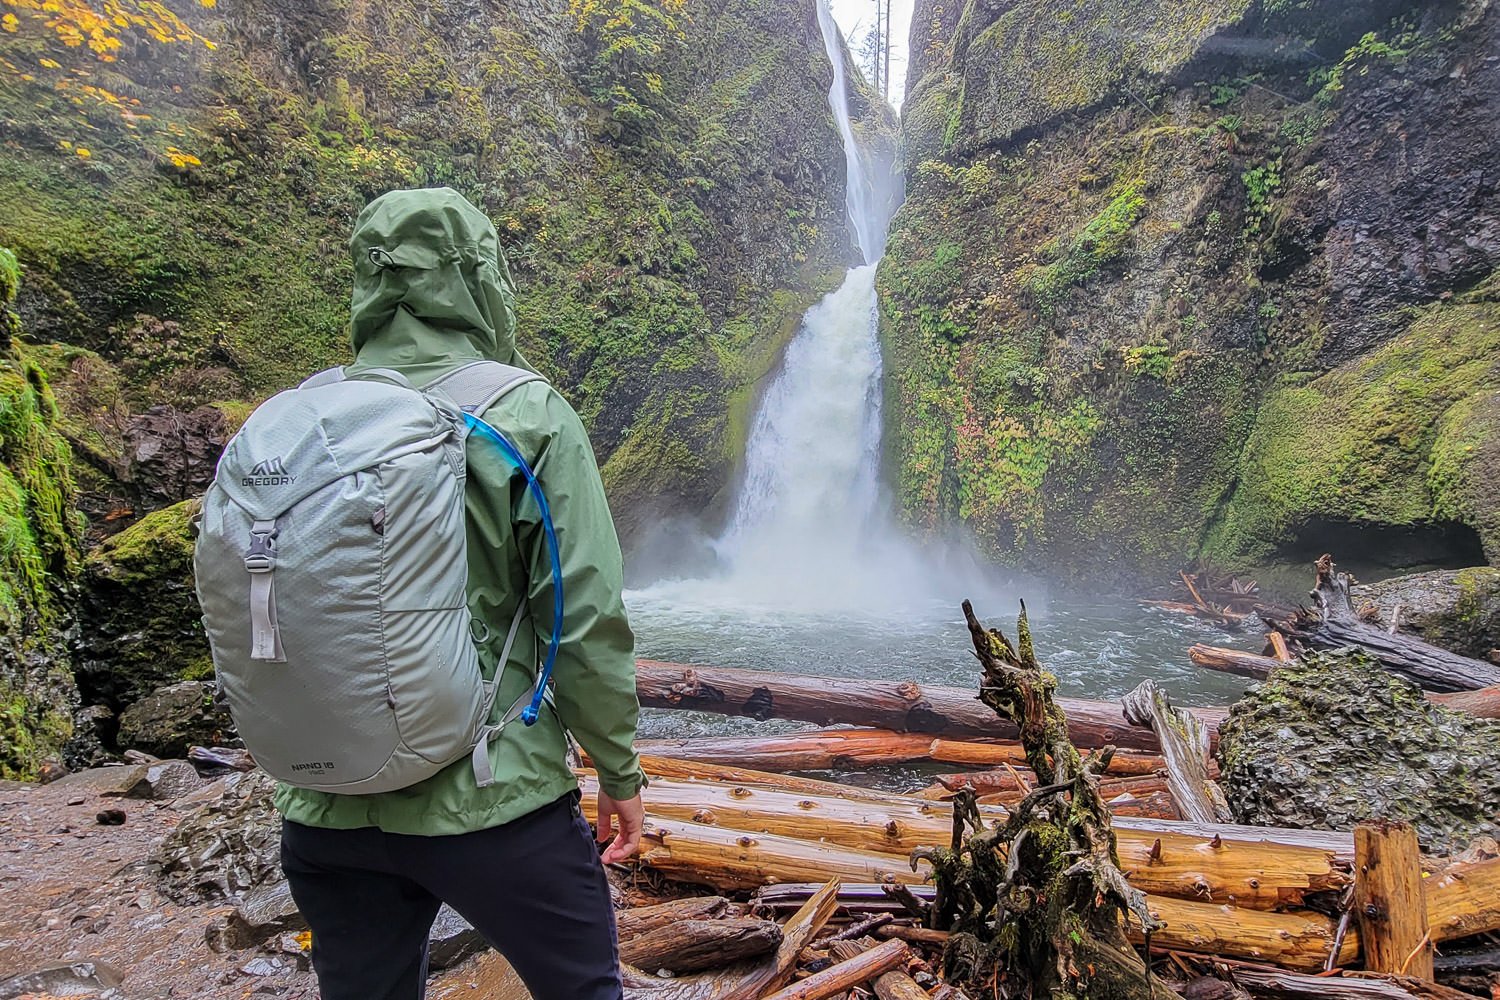 A hiker using the Gregory 3D Hydro hydration bladder on a waterfall day hike in the Gorge.